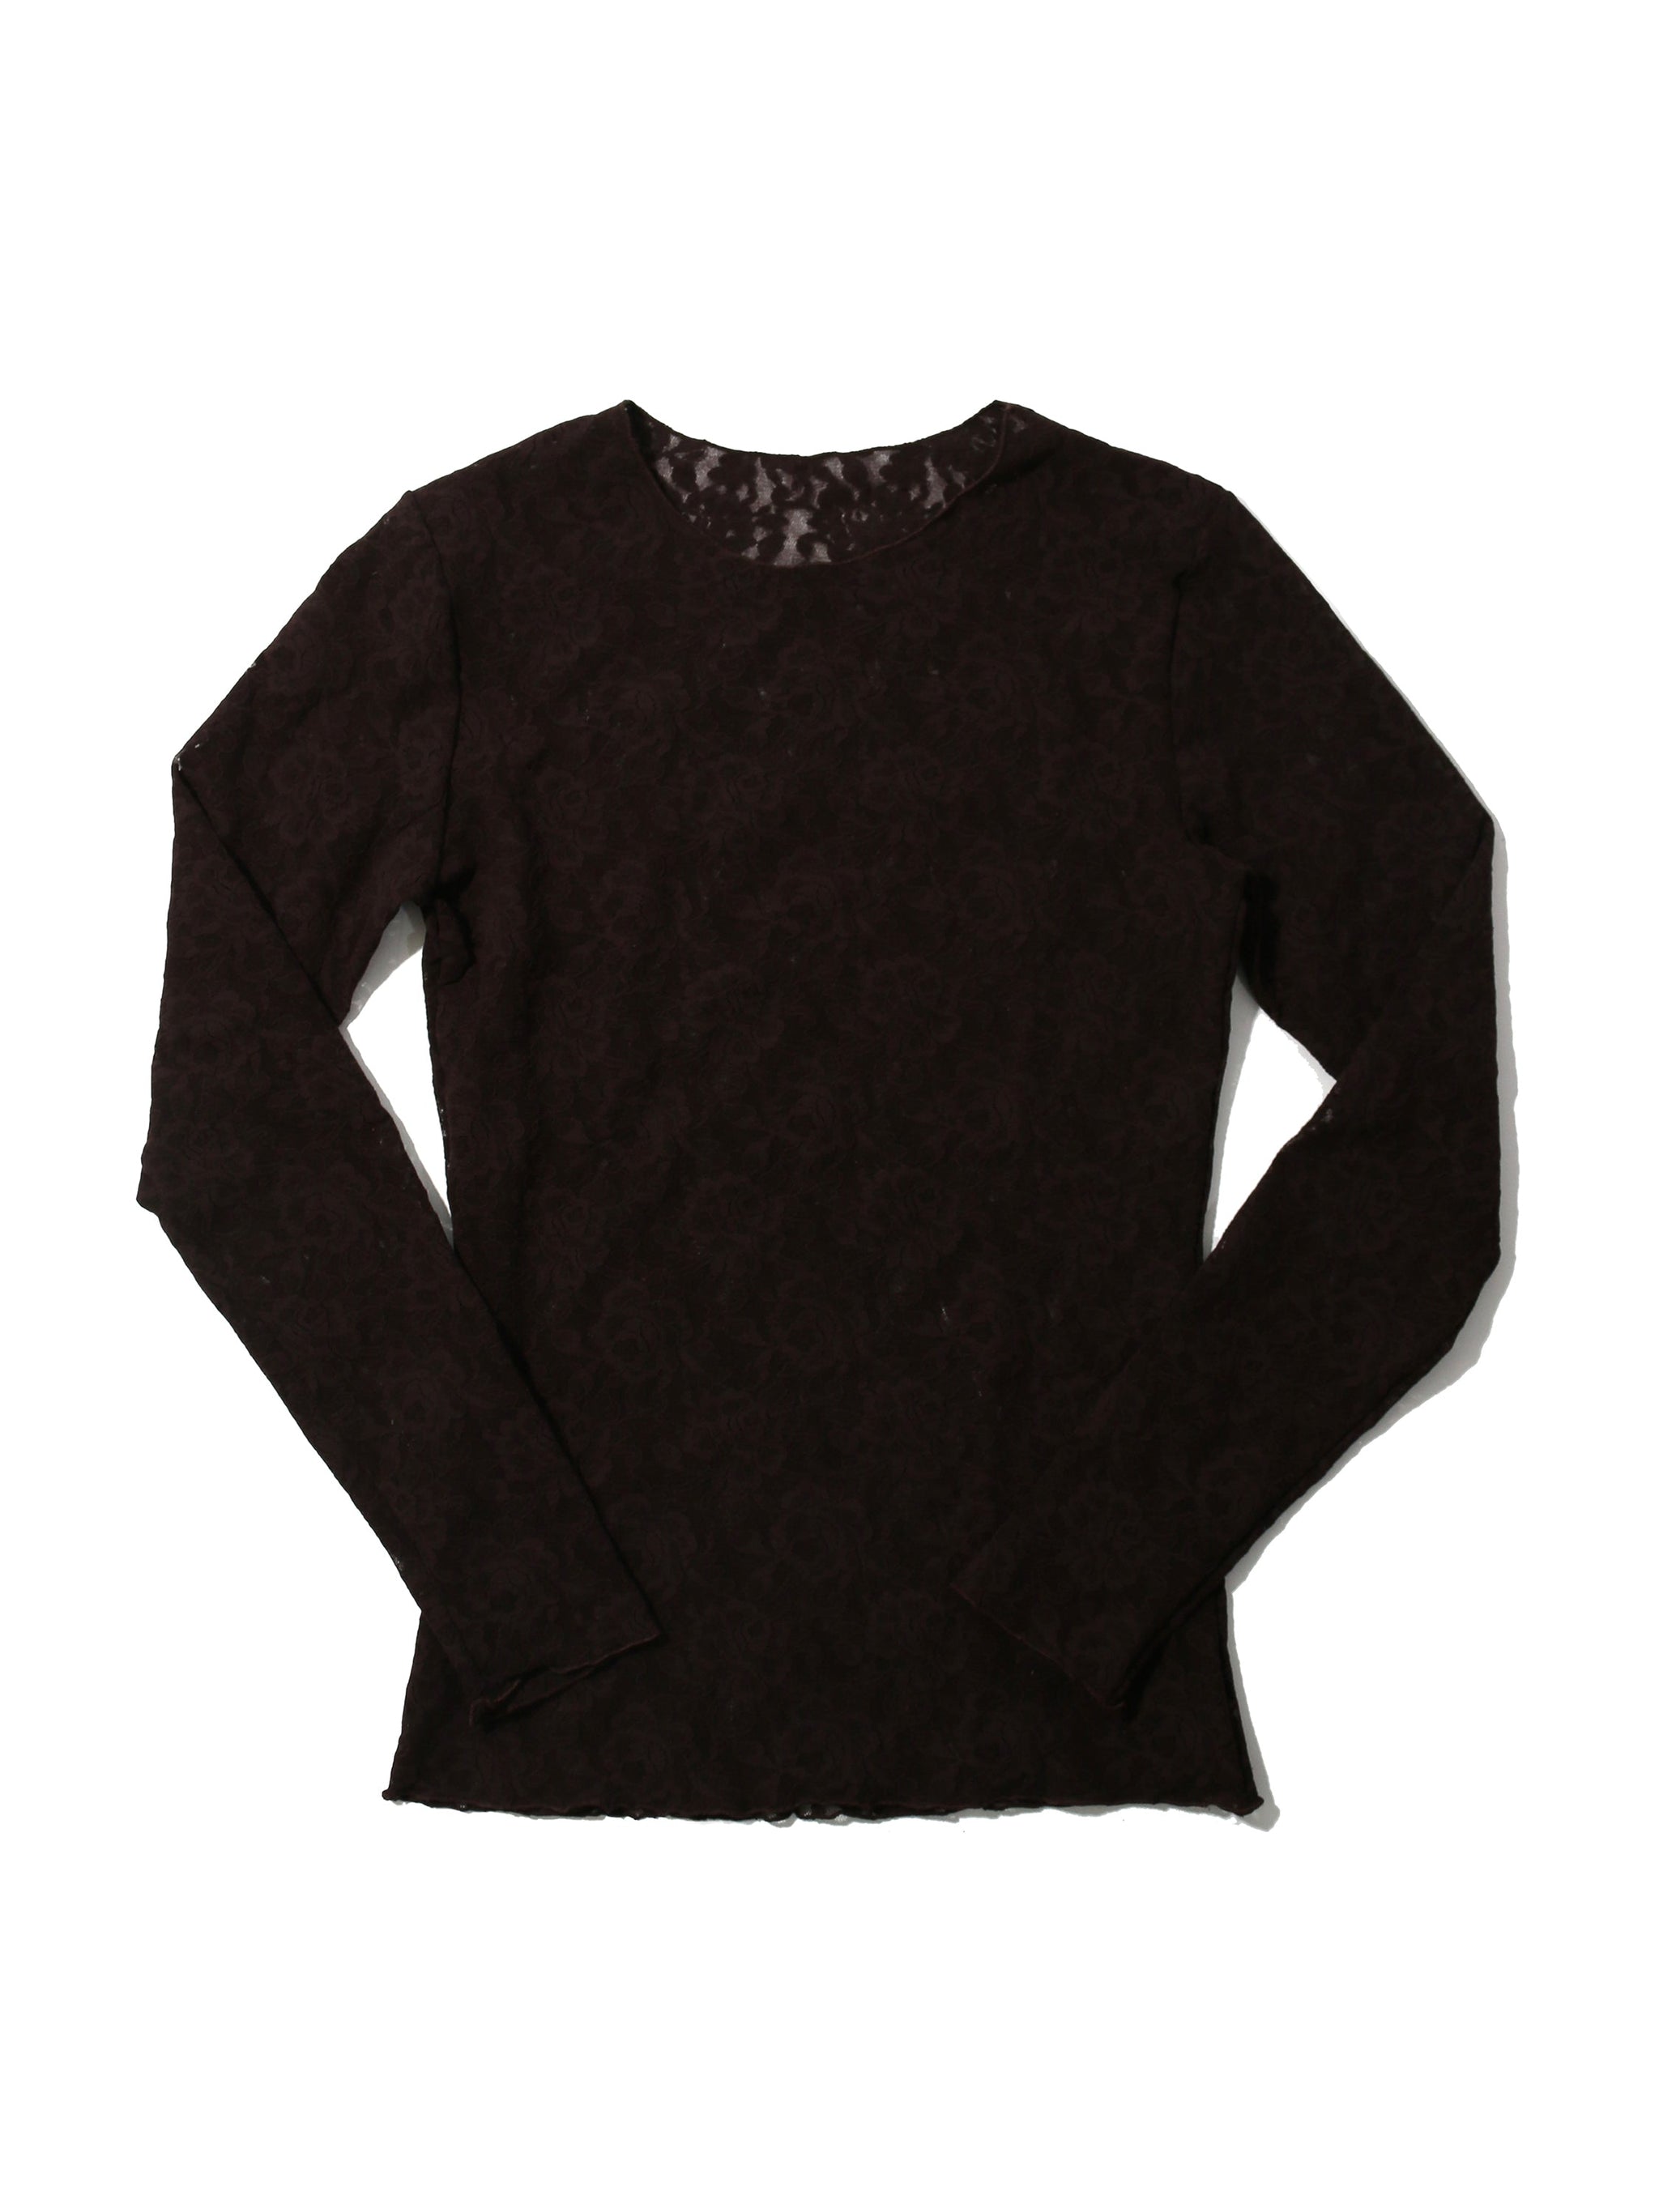 Signature Lace Long Sleeve Top Chocolate Noir Brown